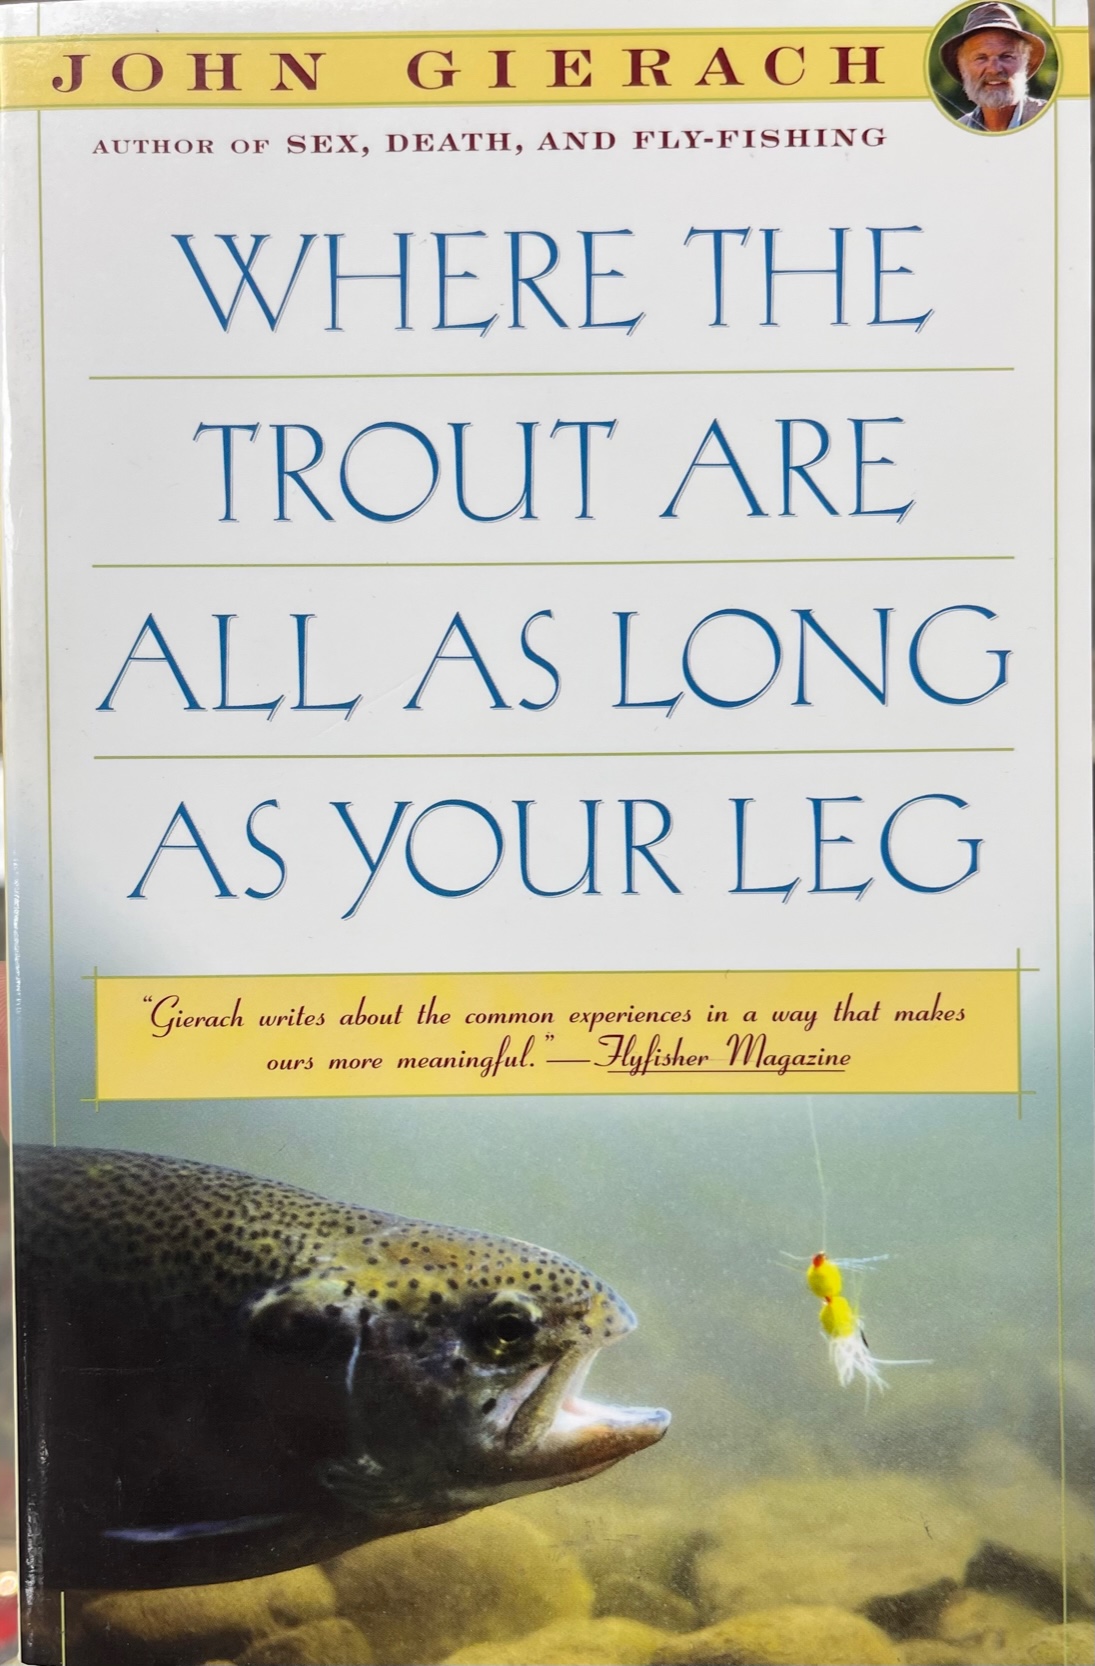 Where The Trout Are All As Long As Your Leg - by John Gierach